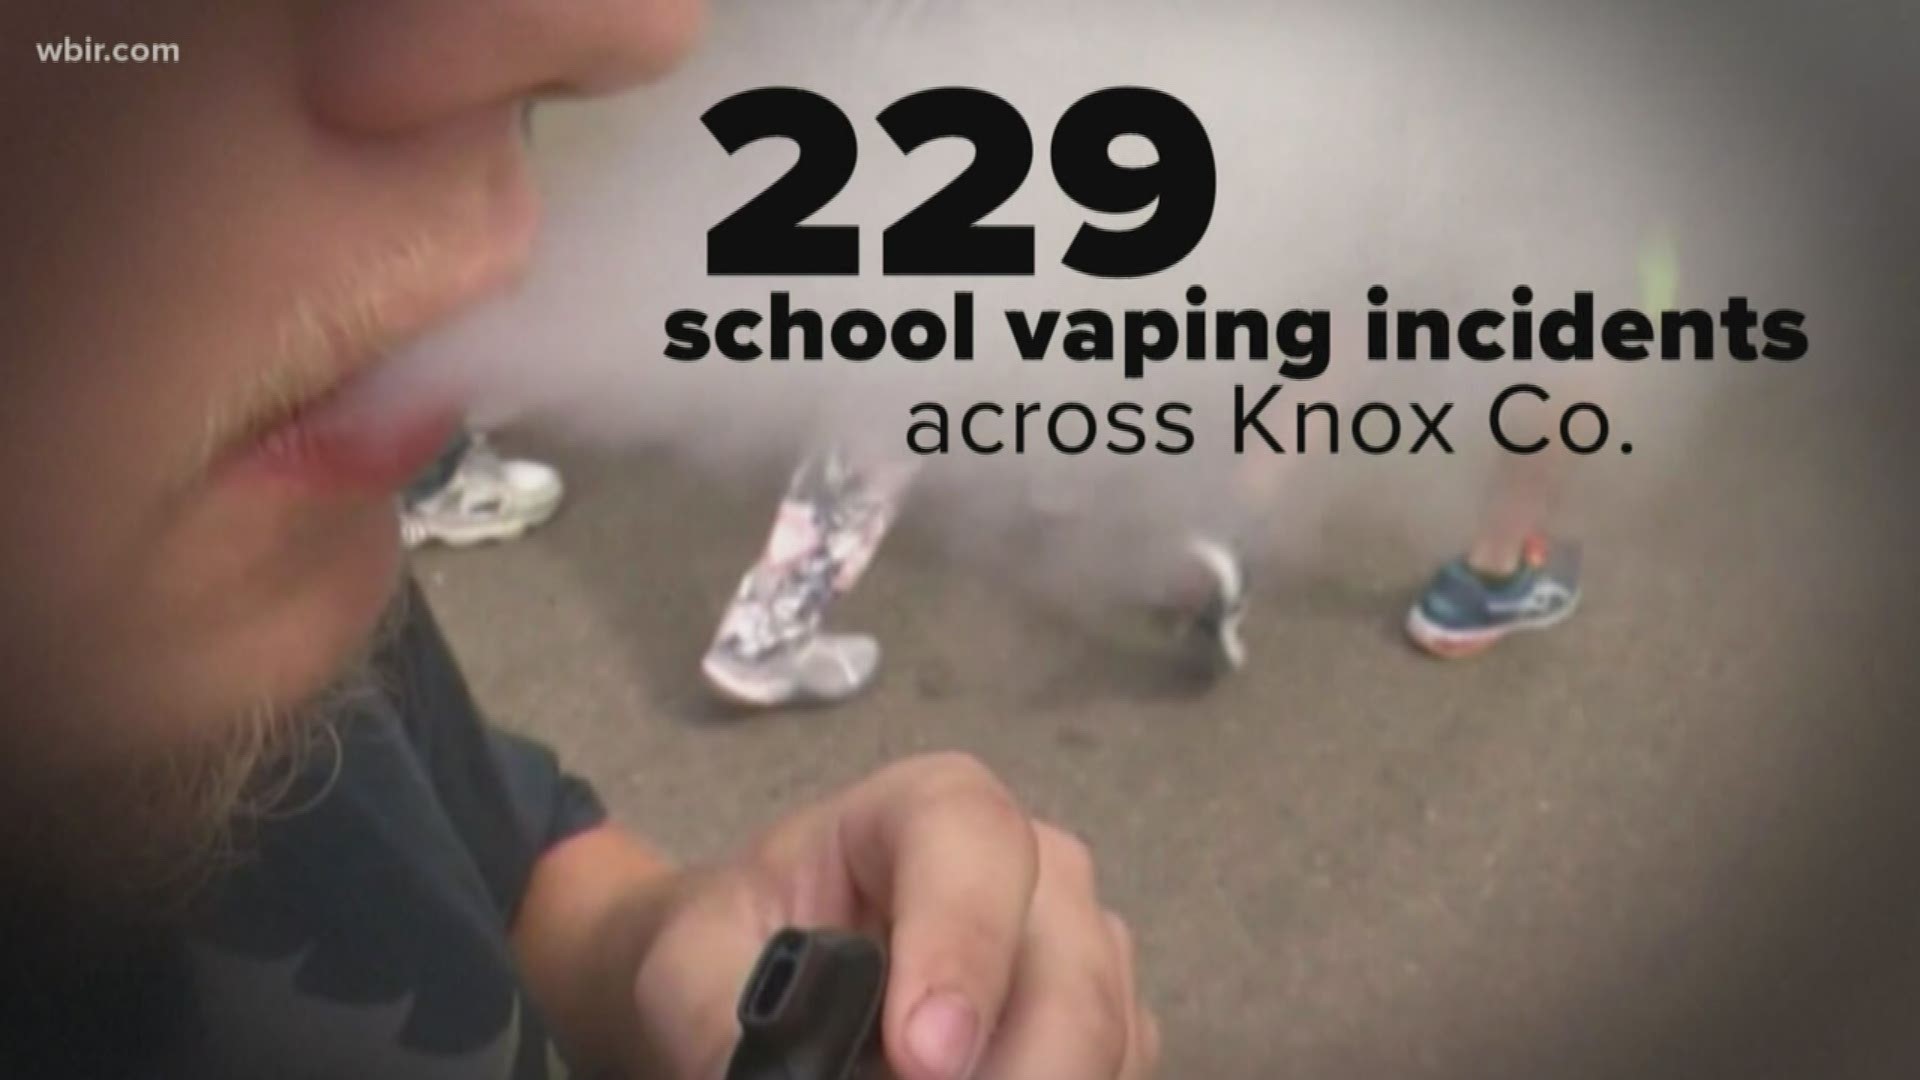 The Knox County Board of Education is trying to figure out how to combat the problem of vaping that's on the rise in schools.